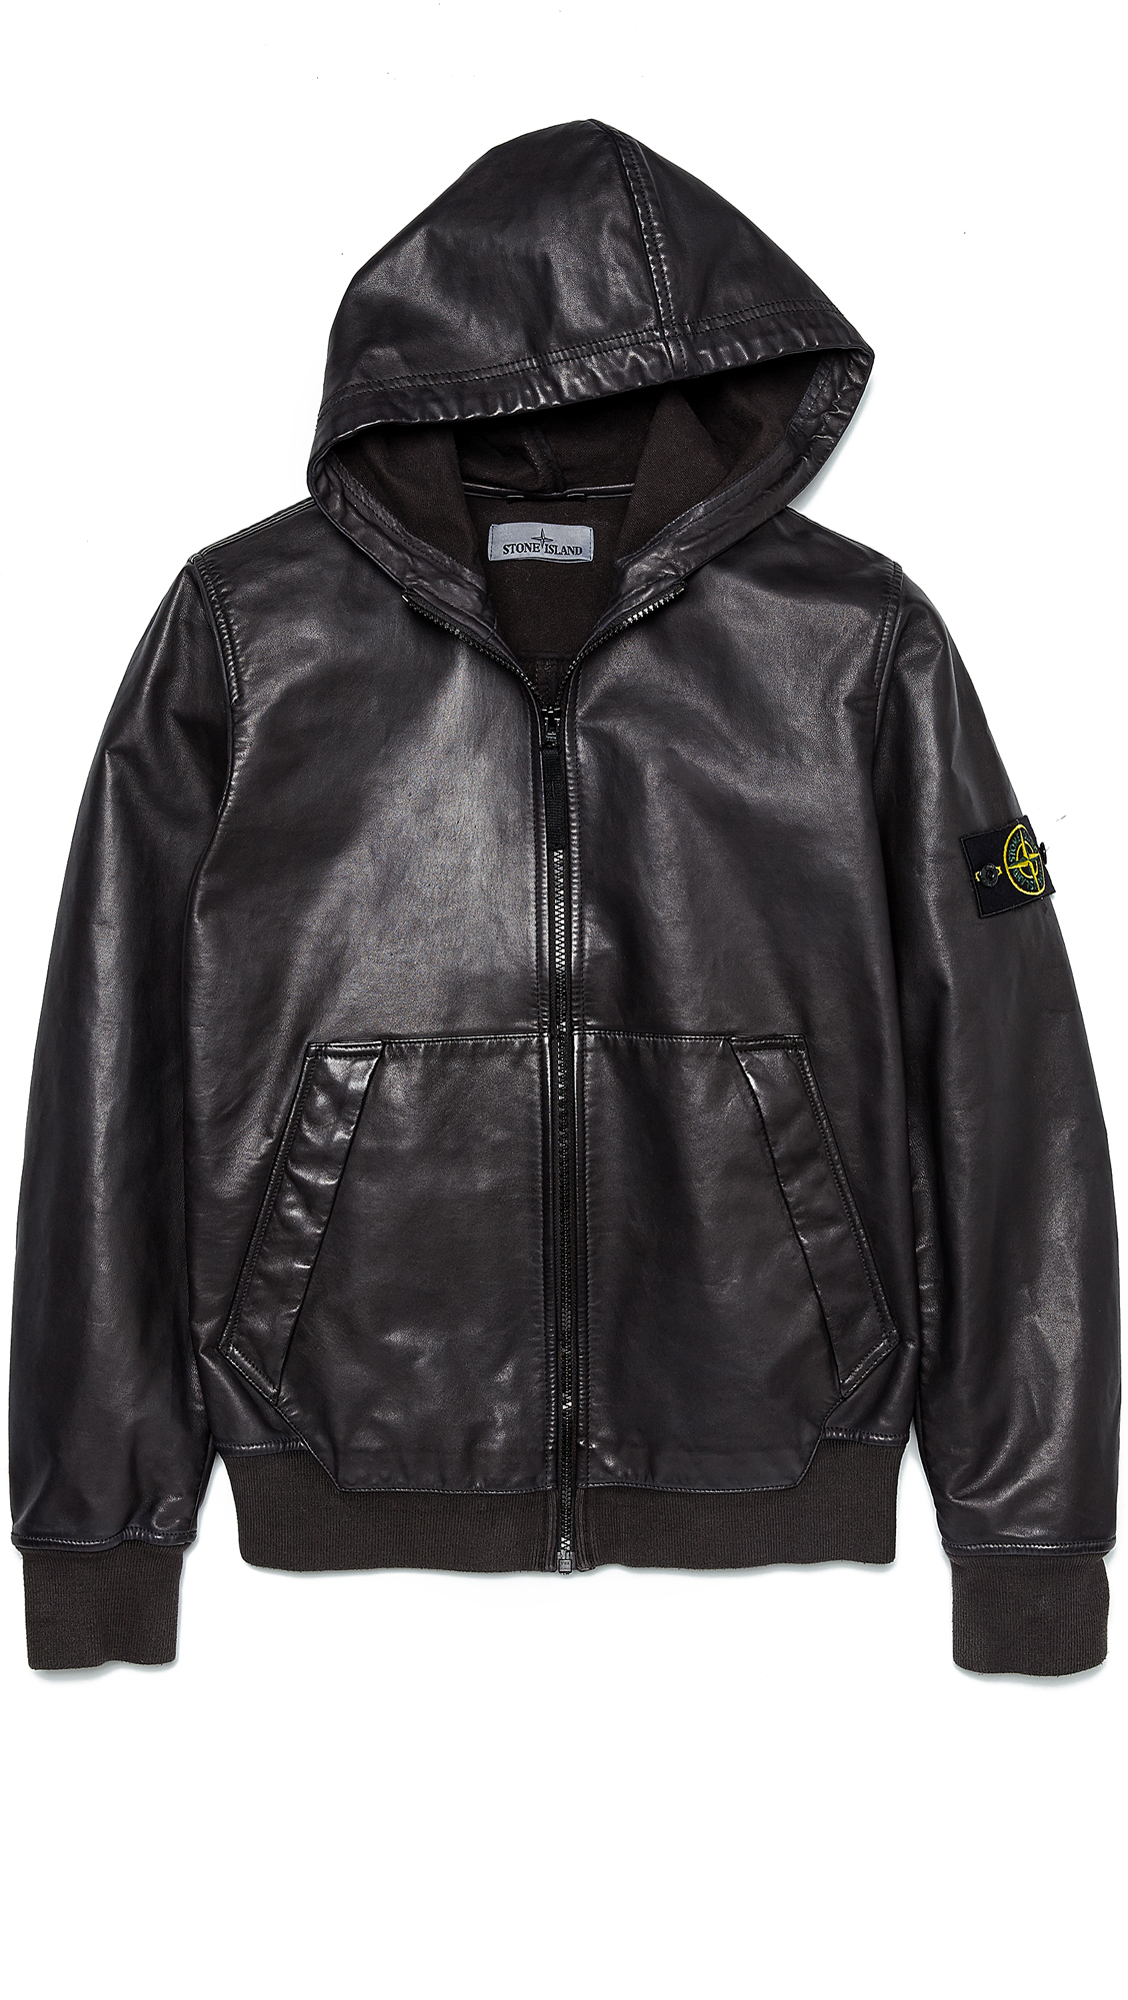 Lyst - Stone island Garment Dyed Leather Jacket in Black for Men